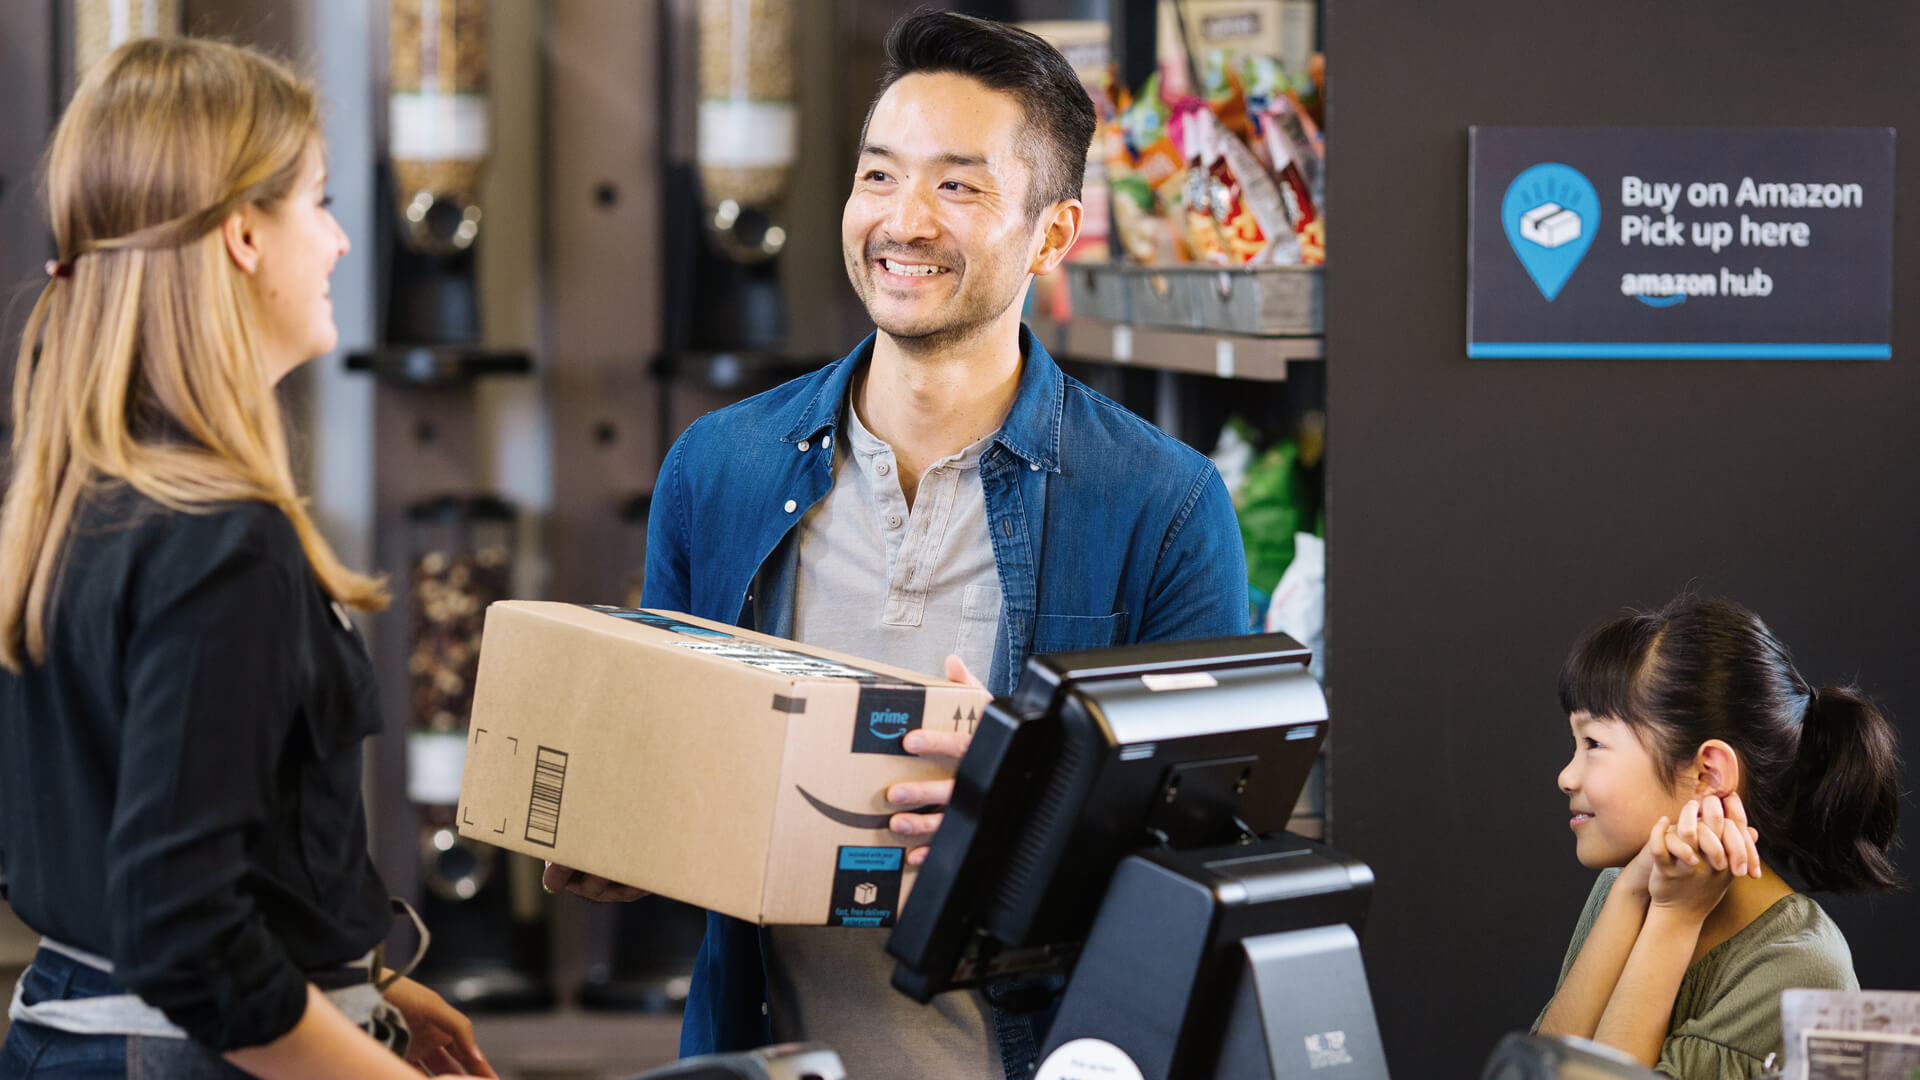 Amazon’s new “Counter” service lets customers pick up packages in staffed retail locations